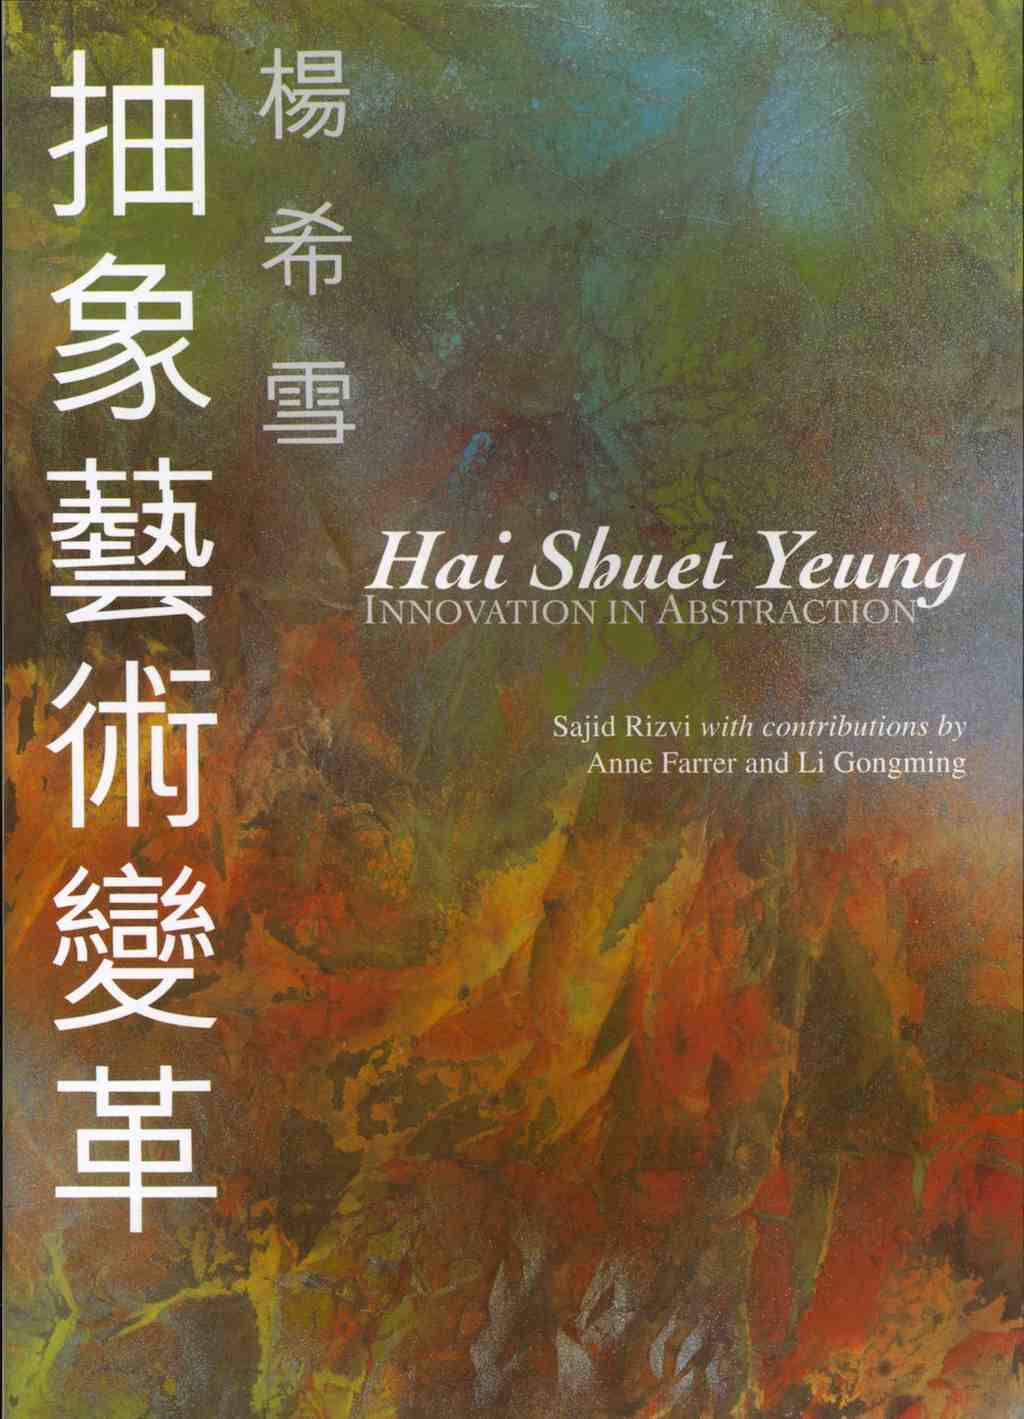 Hai Shuet Yeung: Innovation in Abstraction